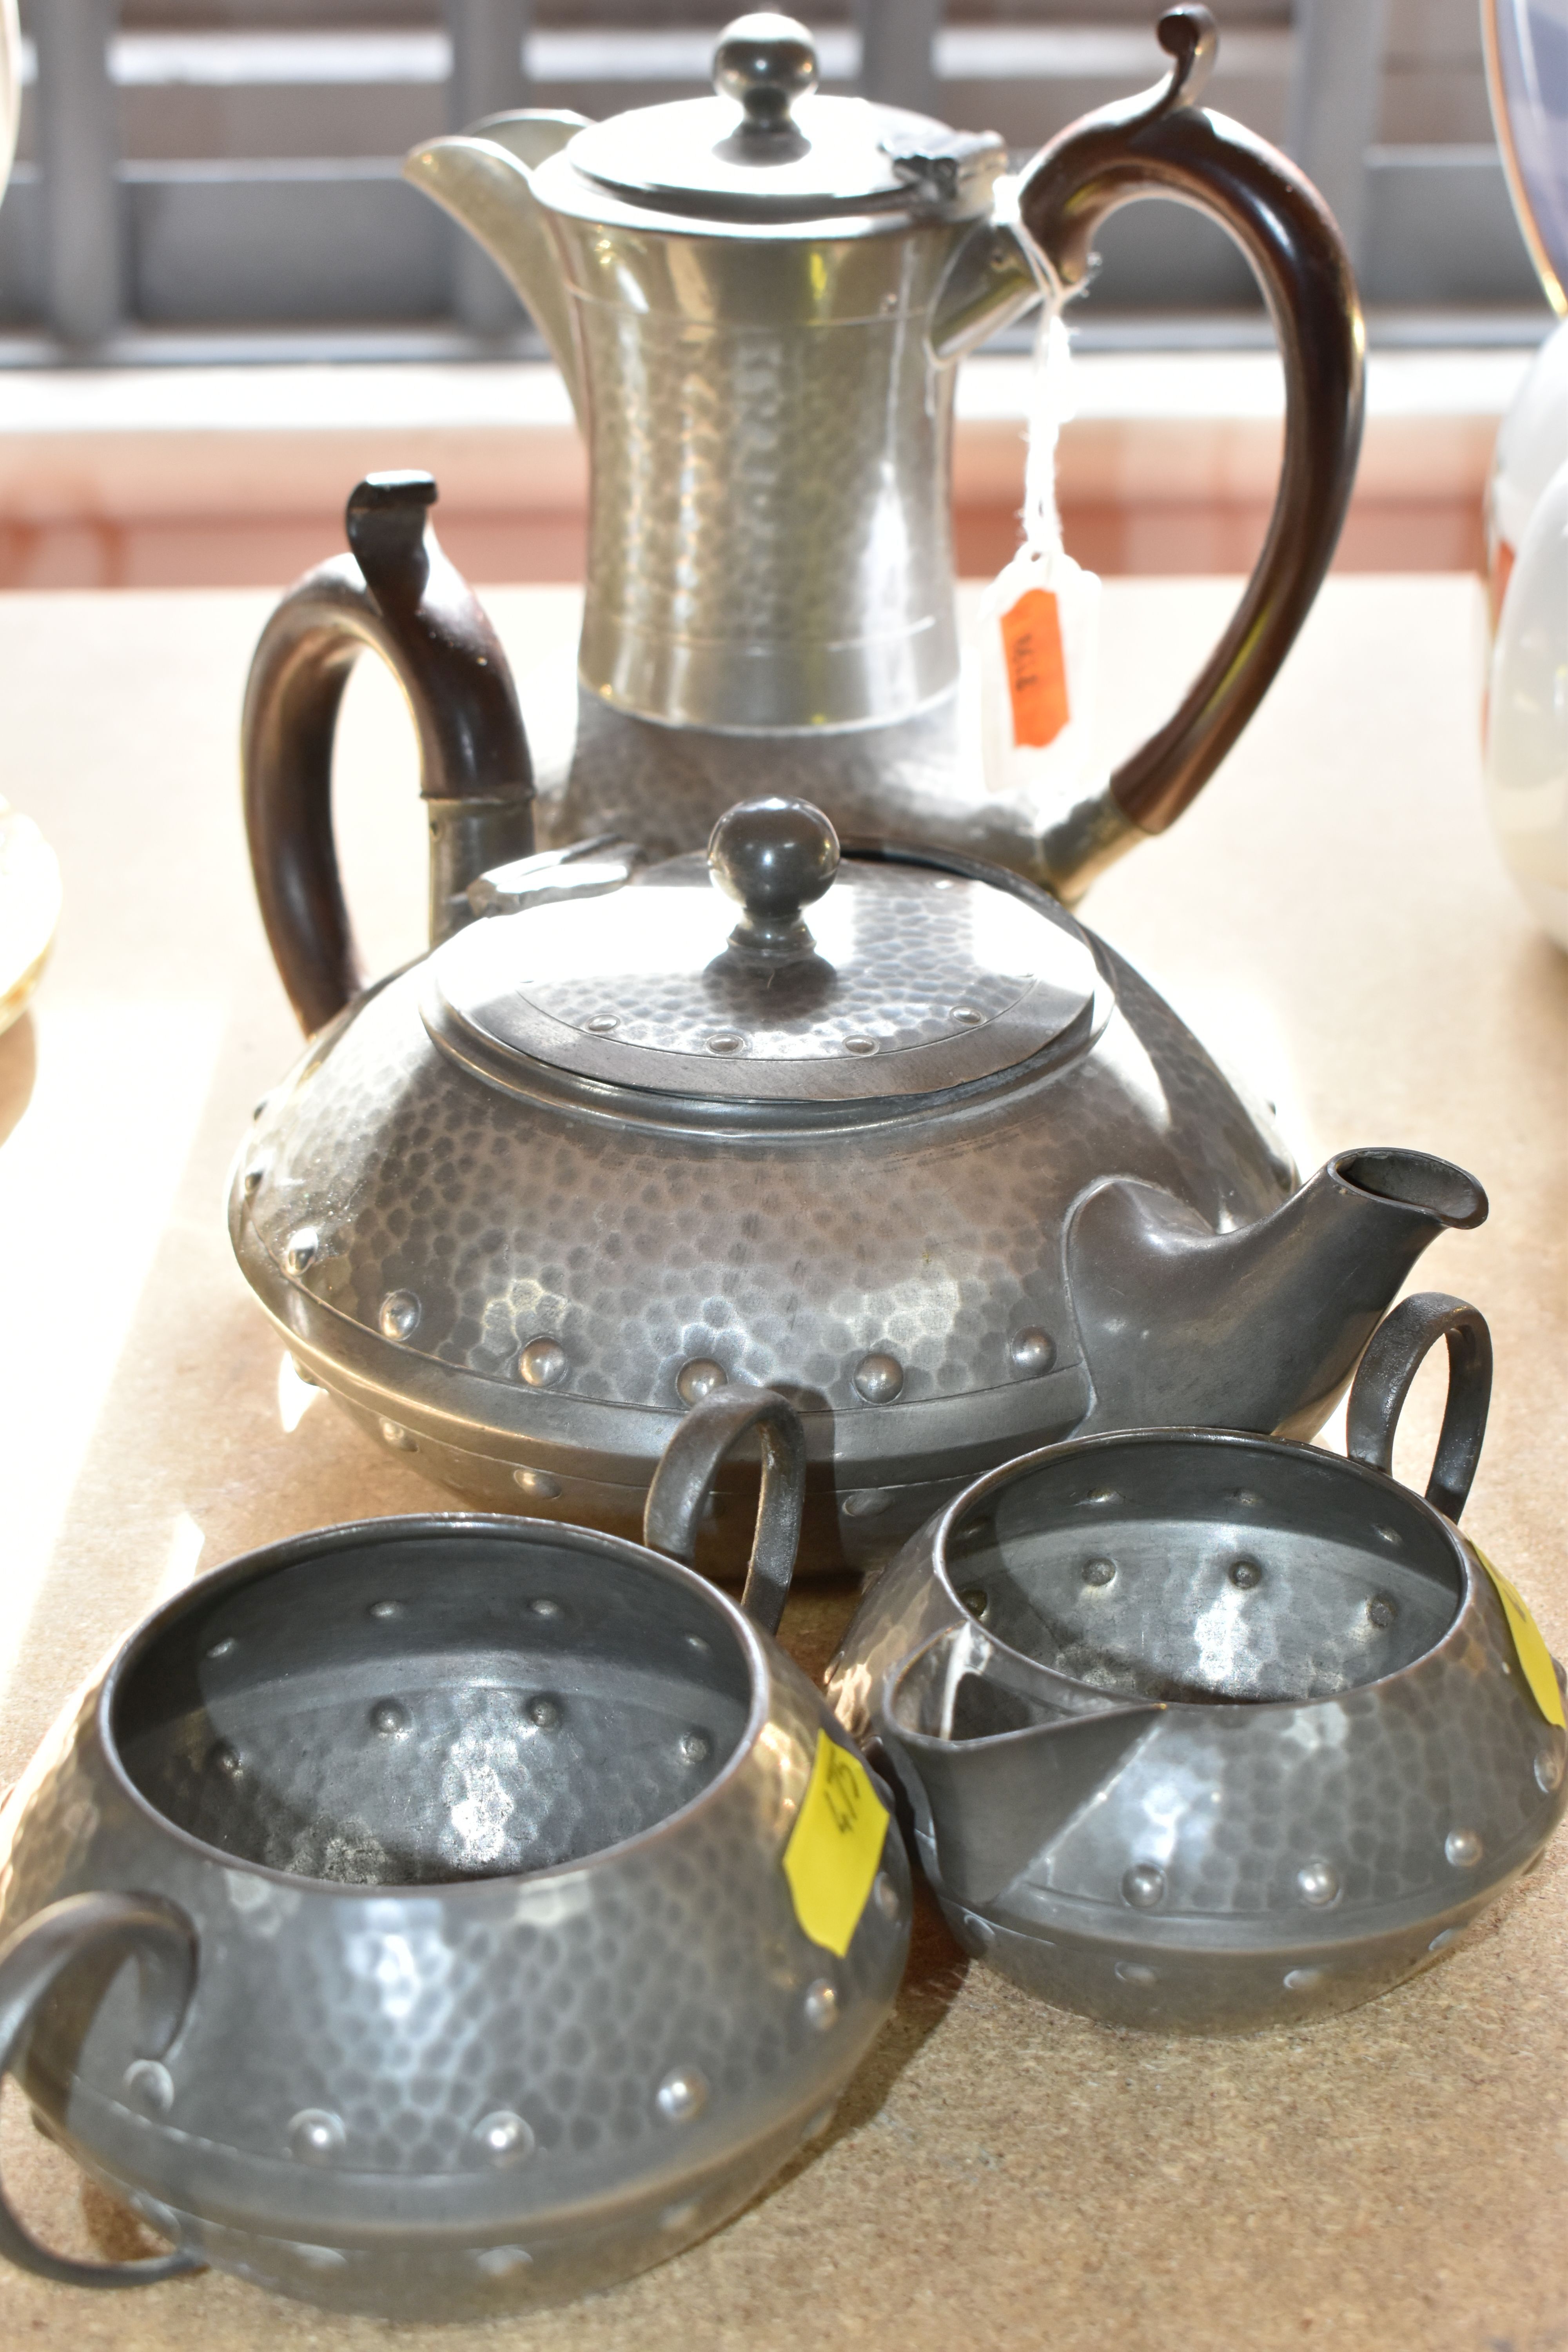 AN EARLY 20TH CENTURY ARTS & CRAFTS PLANISHED PEWTER TEA SET, comprising teapot, hot water jug, milk - Image 6 of 6